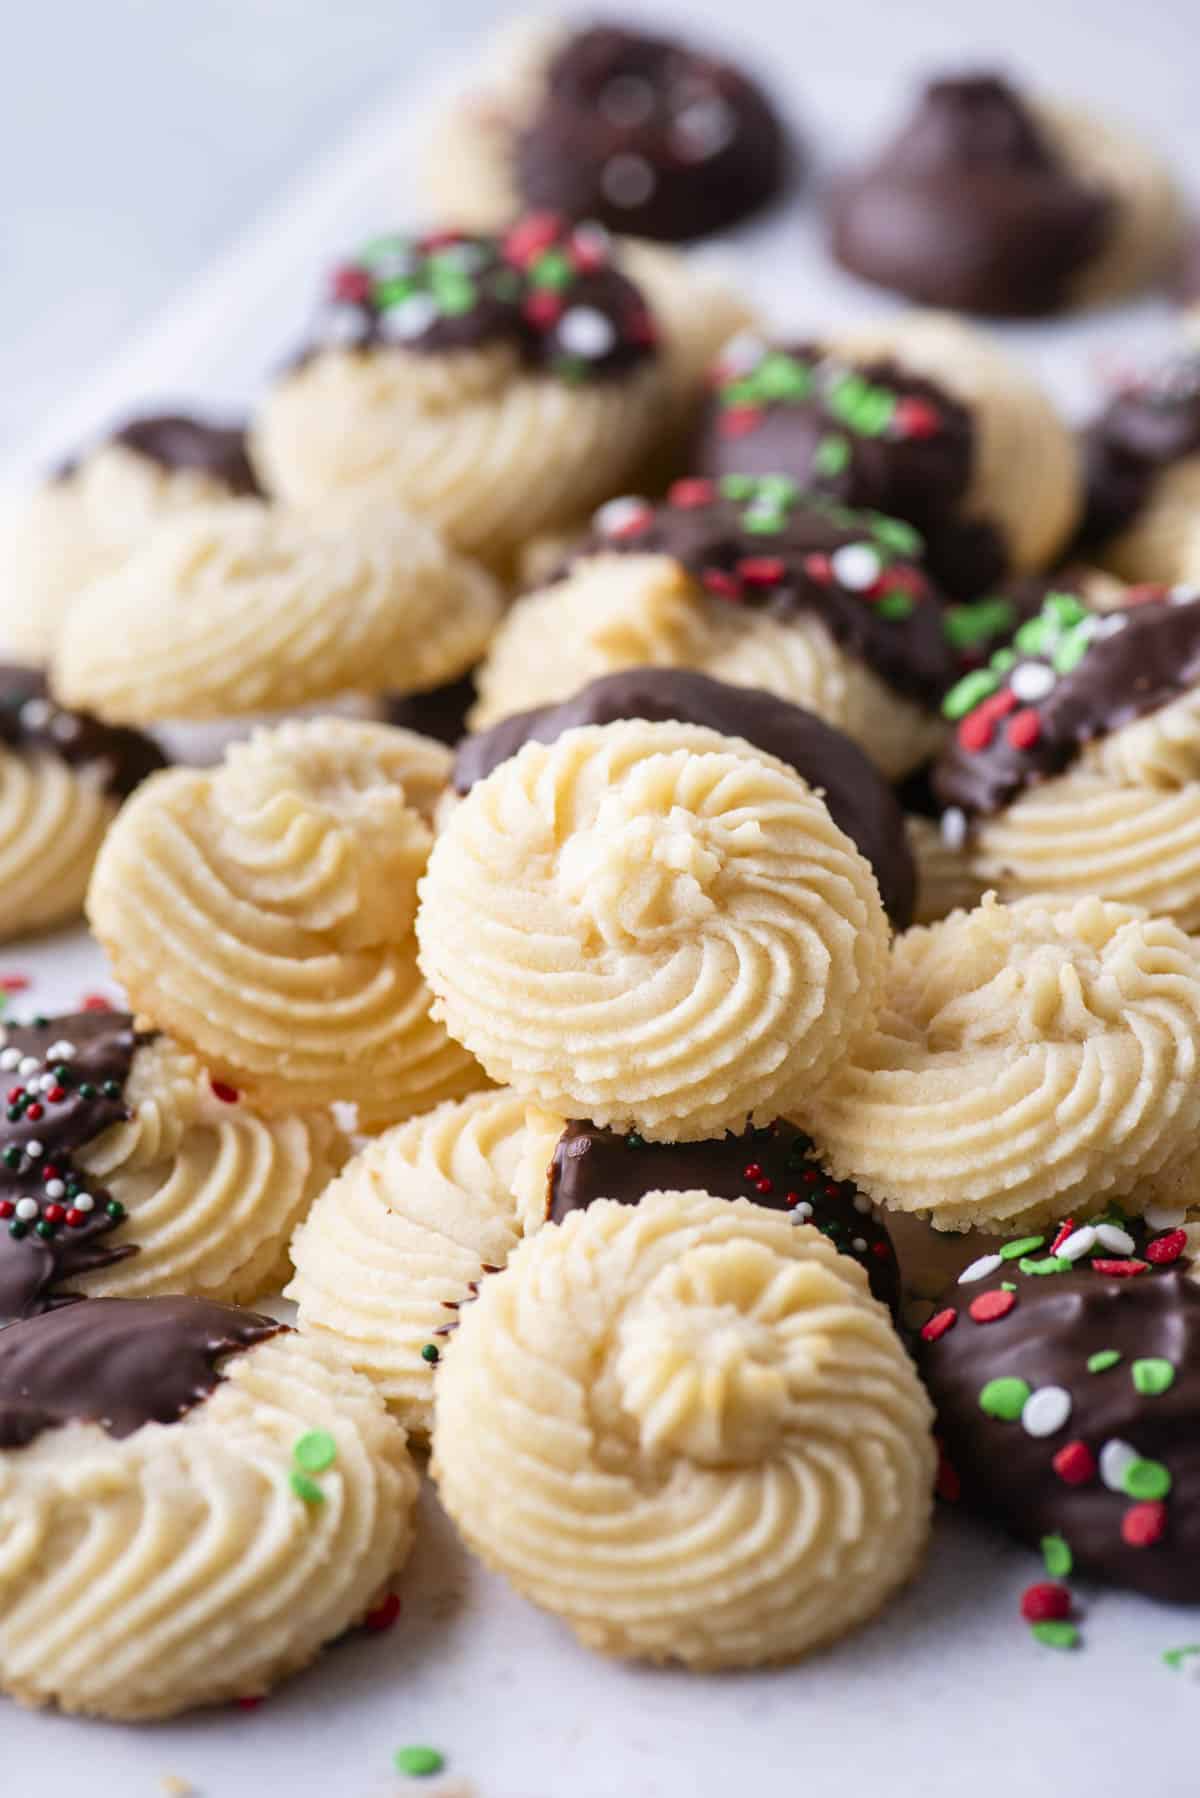 An assortment of butter cookies piled on top of each other, some plain cookies, some dipped in chocolate and some dipped in chocolate with red, green and white sprinkles